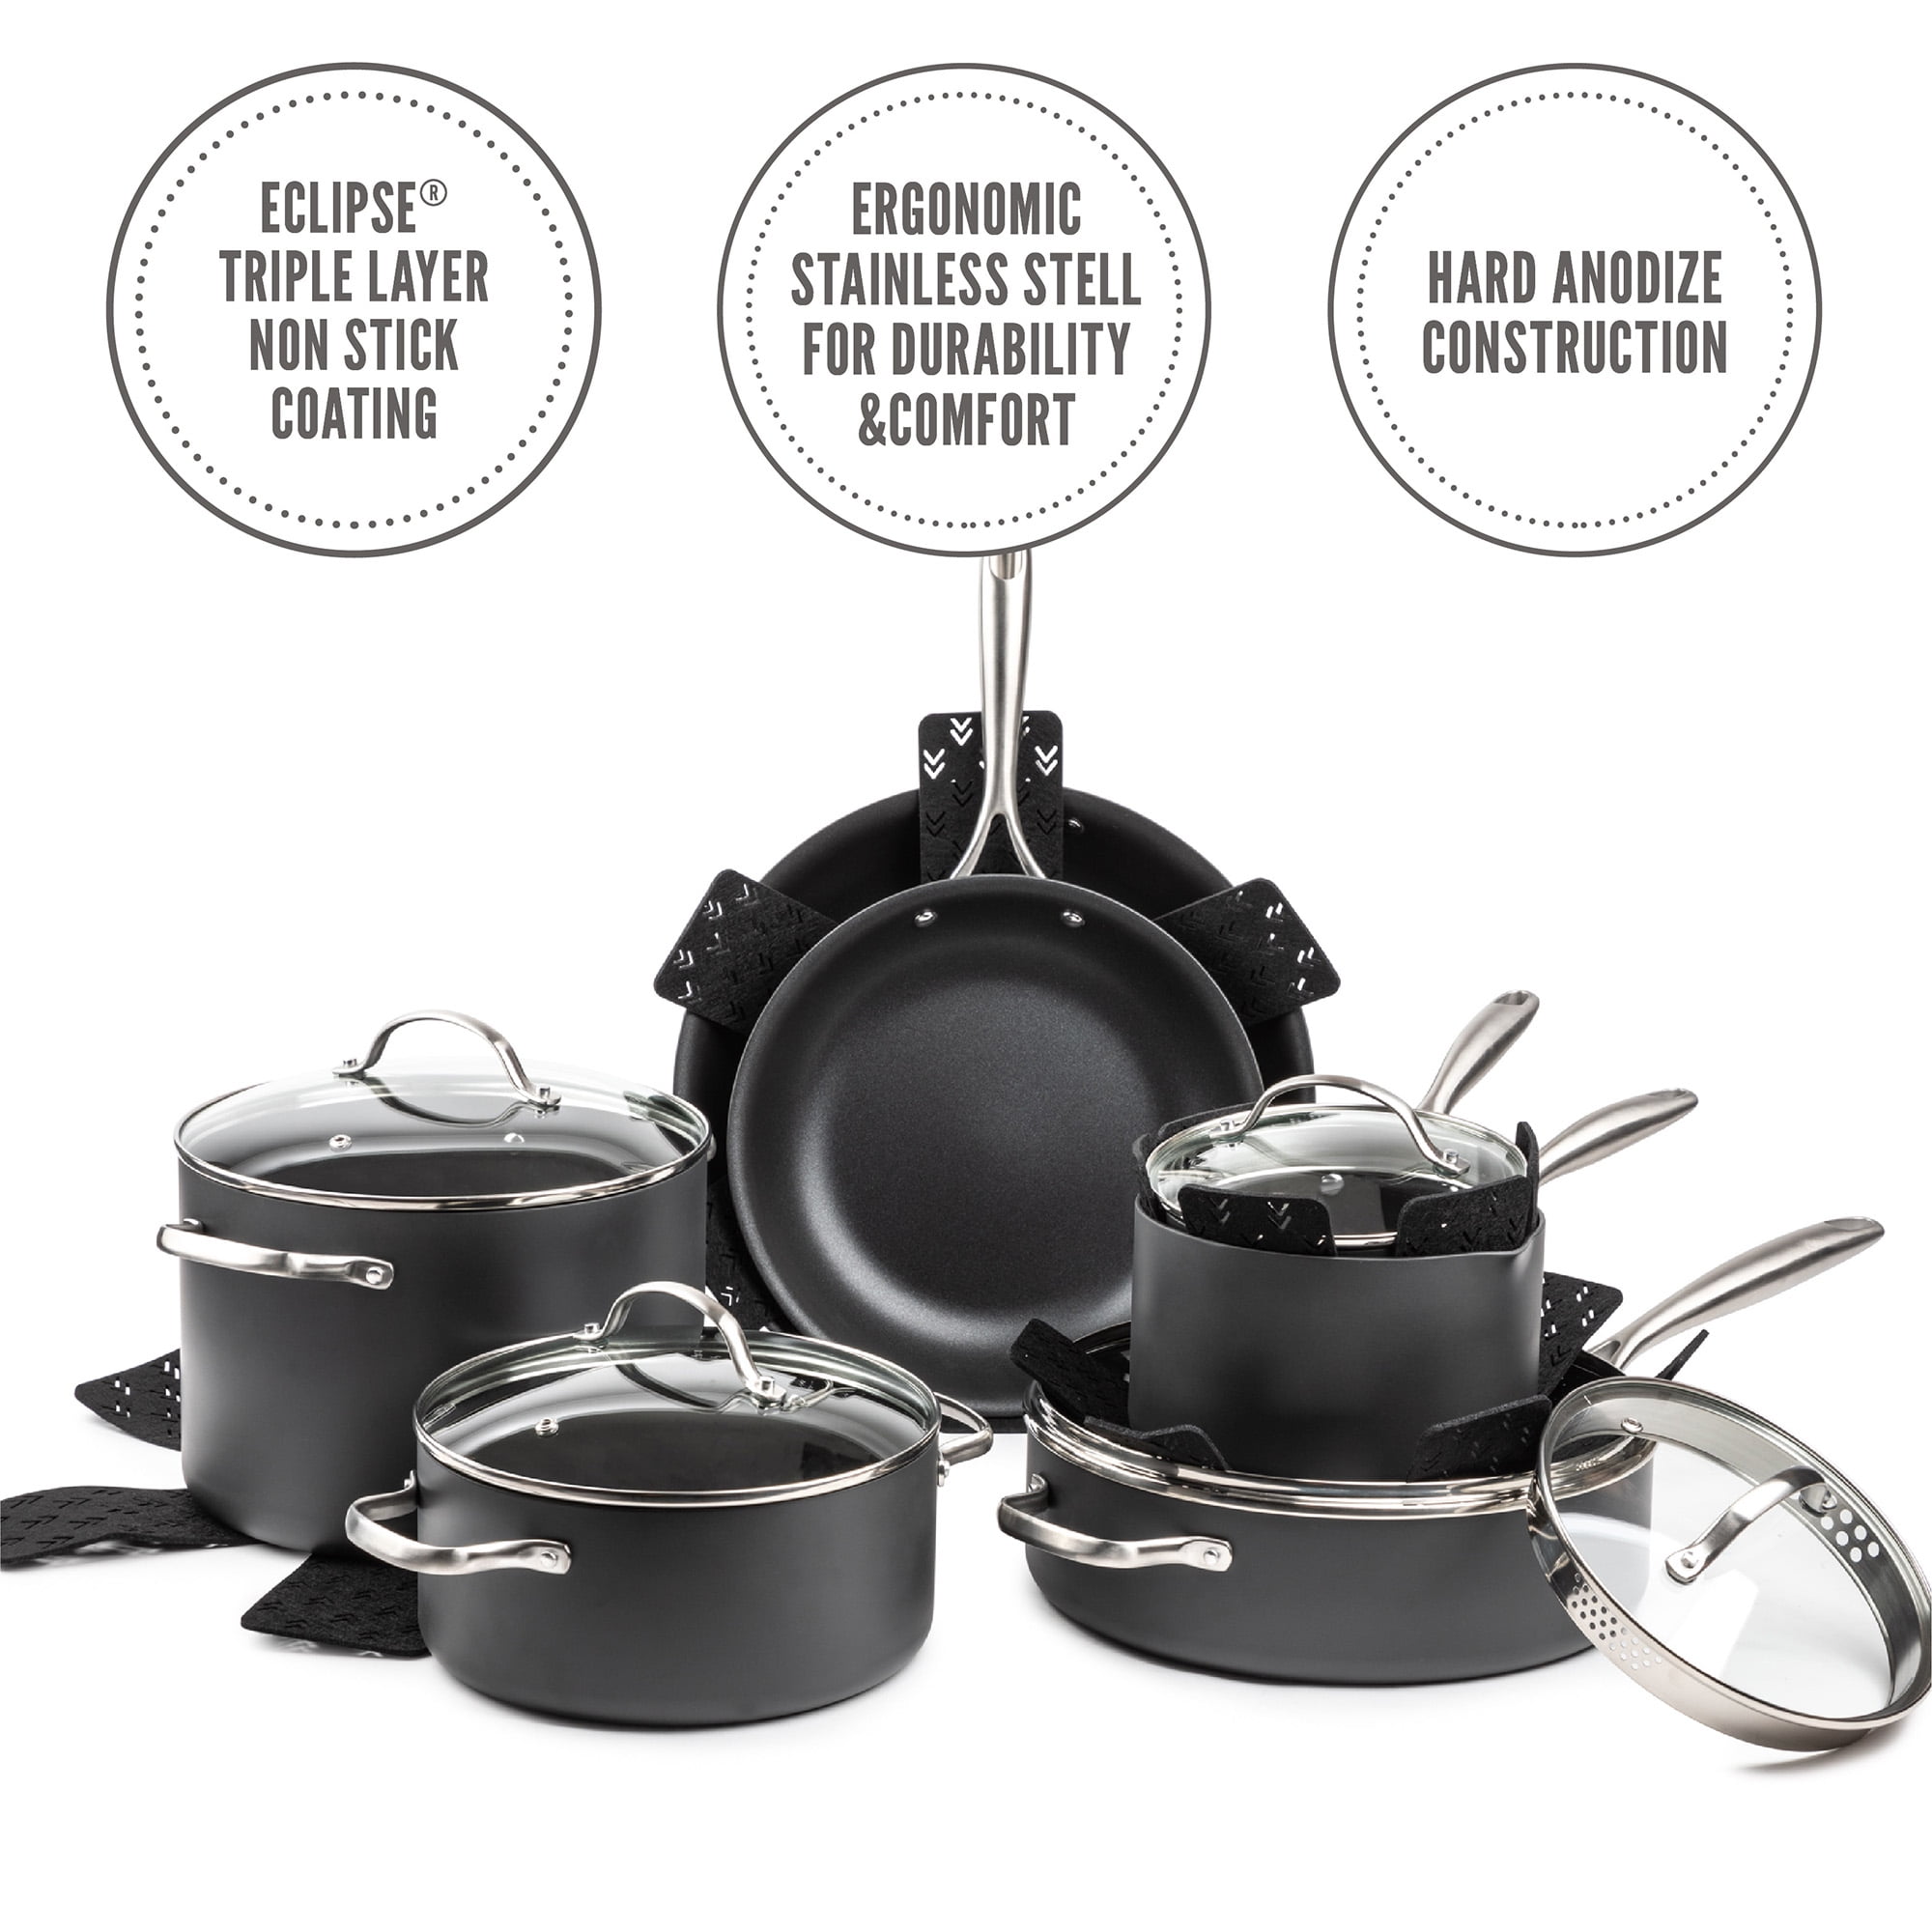 Walmart Corinth - Get this 28-piece Thyme & Table cookware and bakeware set  for the low price of $79!! #wm105 #dealsfordays